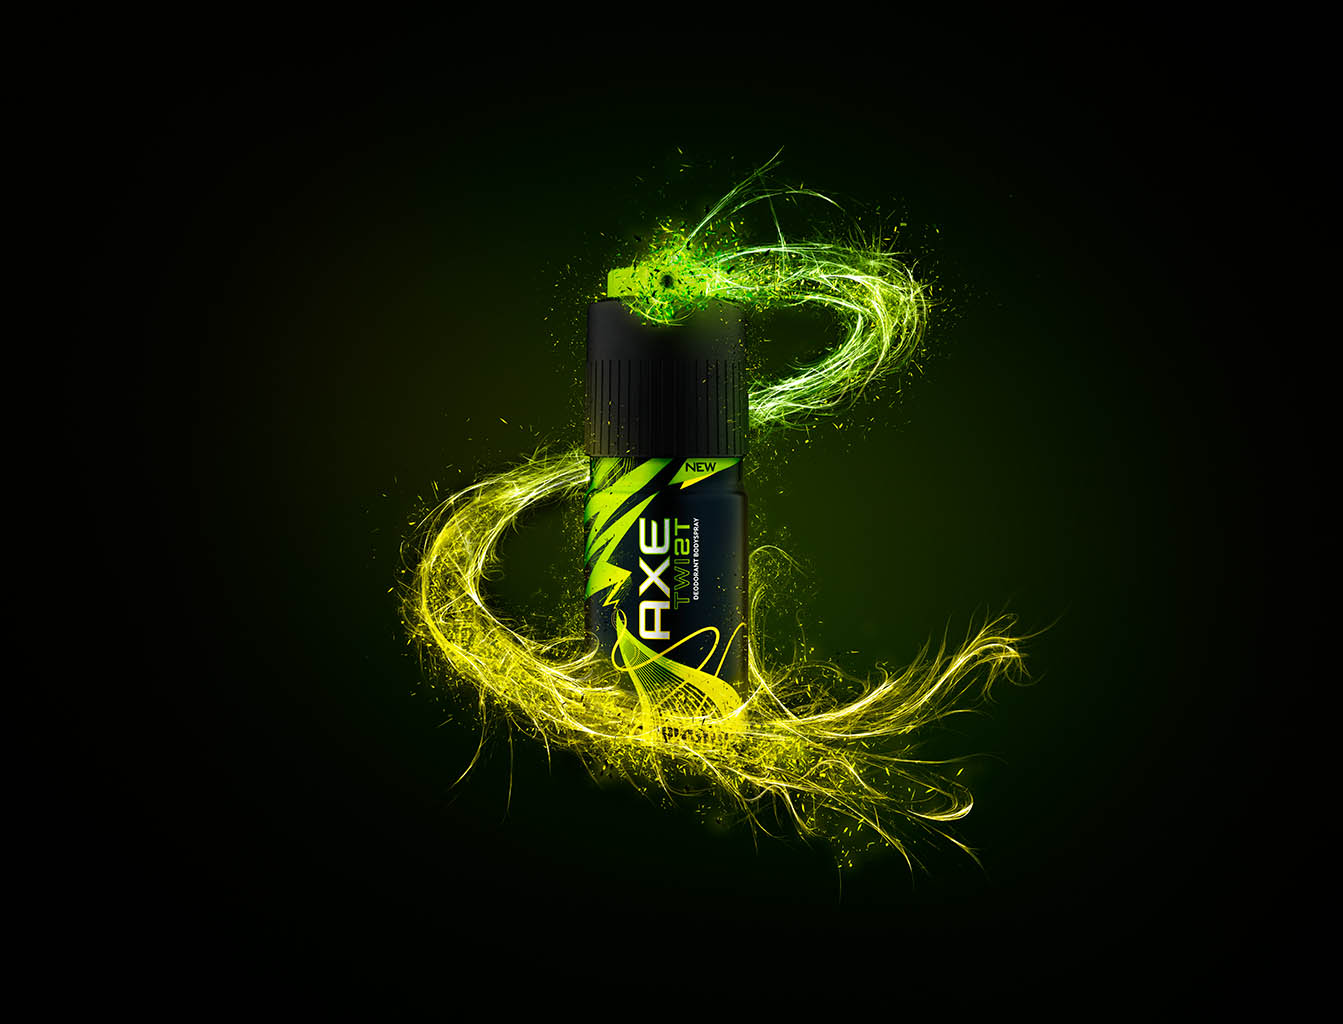 Creative Still Life Product Photography and Retouching of Axe Twist deodorand bodyspray by Packshot Factory